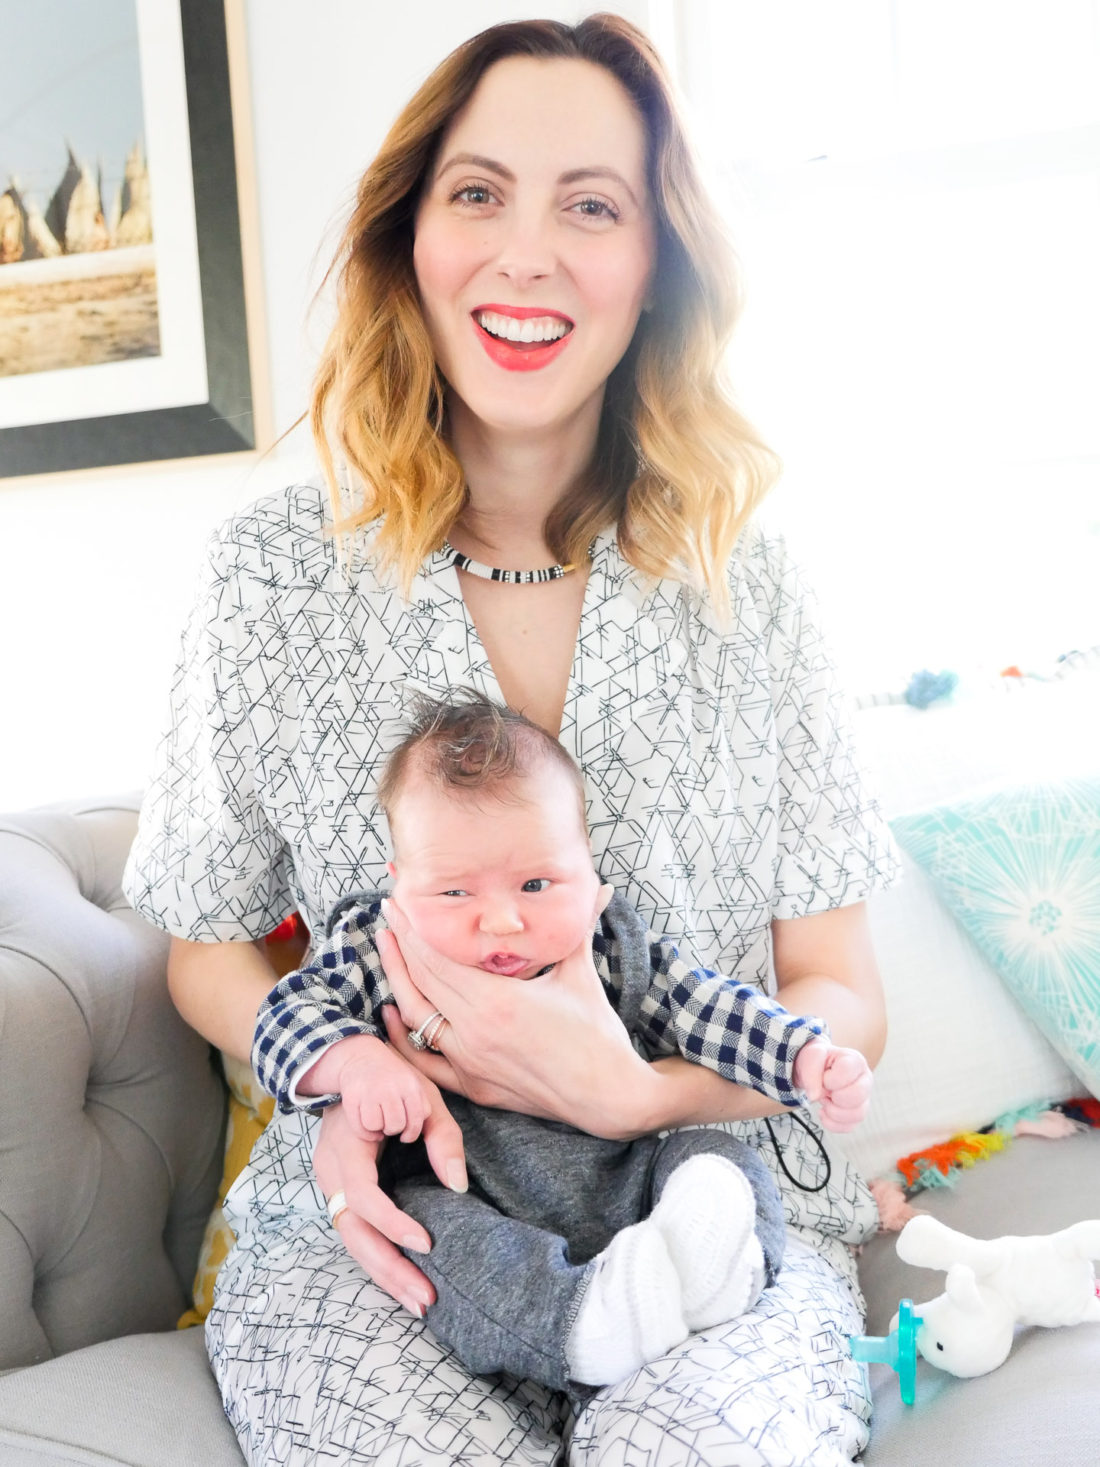 Eva amurri Martino of lifestyle and motherhood blog Happily Eva After, holding newborn son Major James at his Sip And See at home in Connecticut